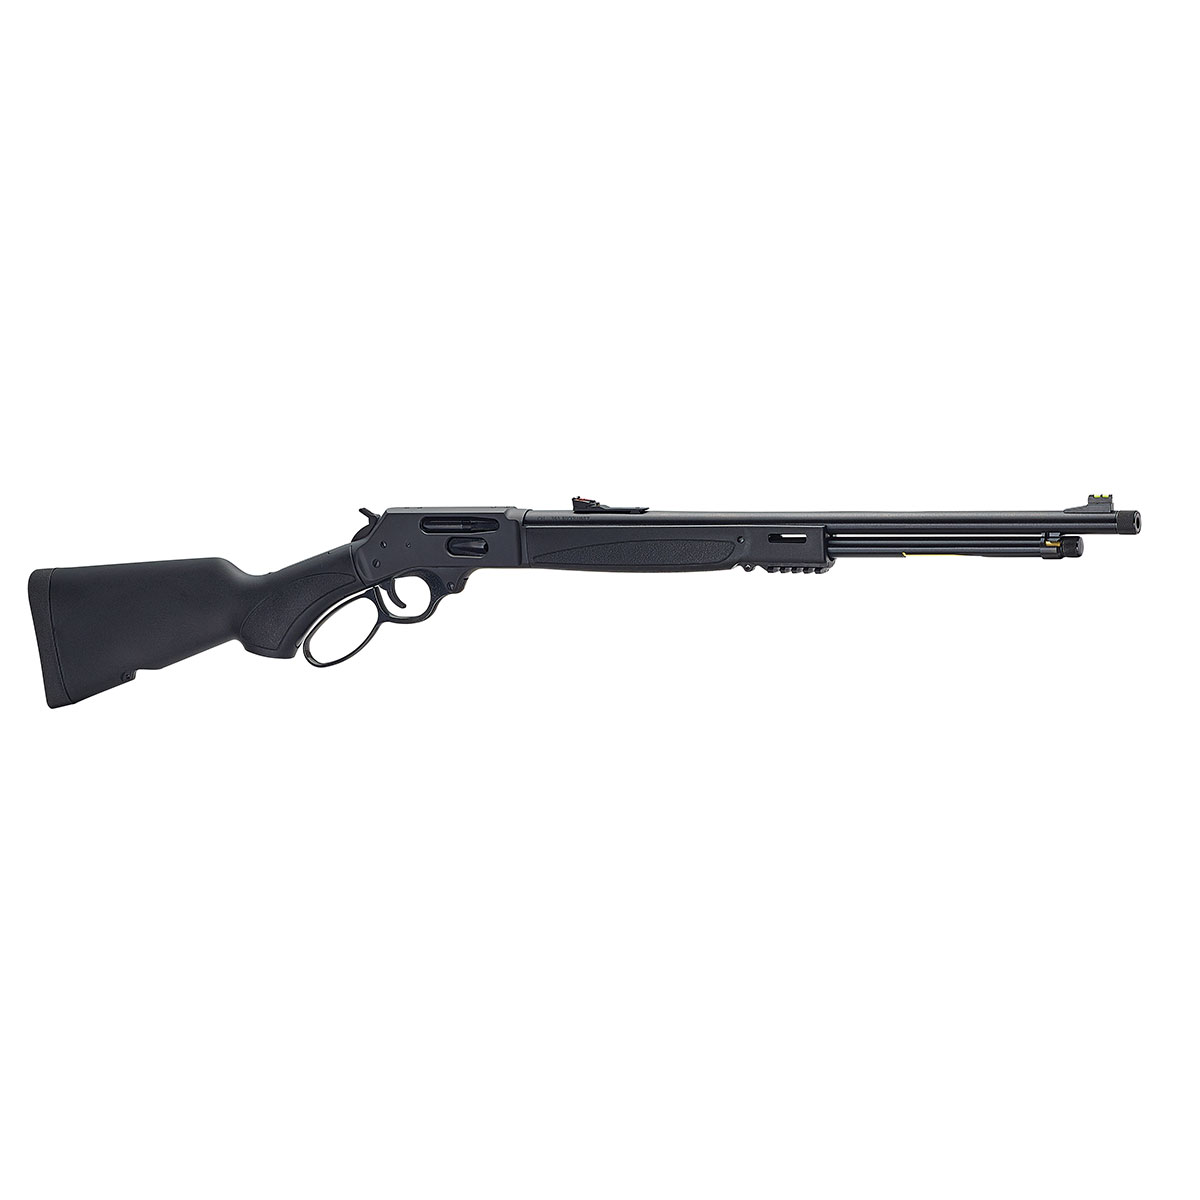 HENRY REPEATING ARMS - X MODEL 360 BUCKHAMMER LEVER ACTION RIFLE